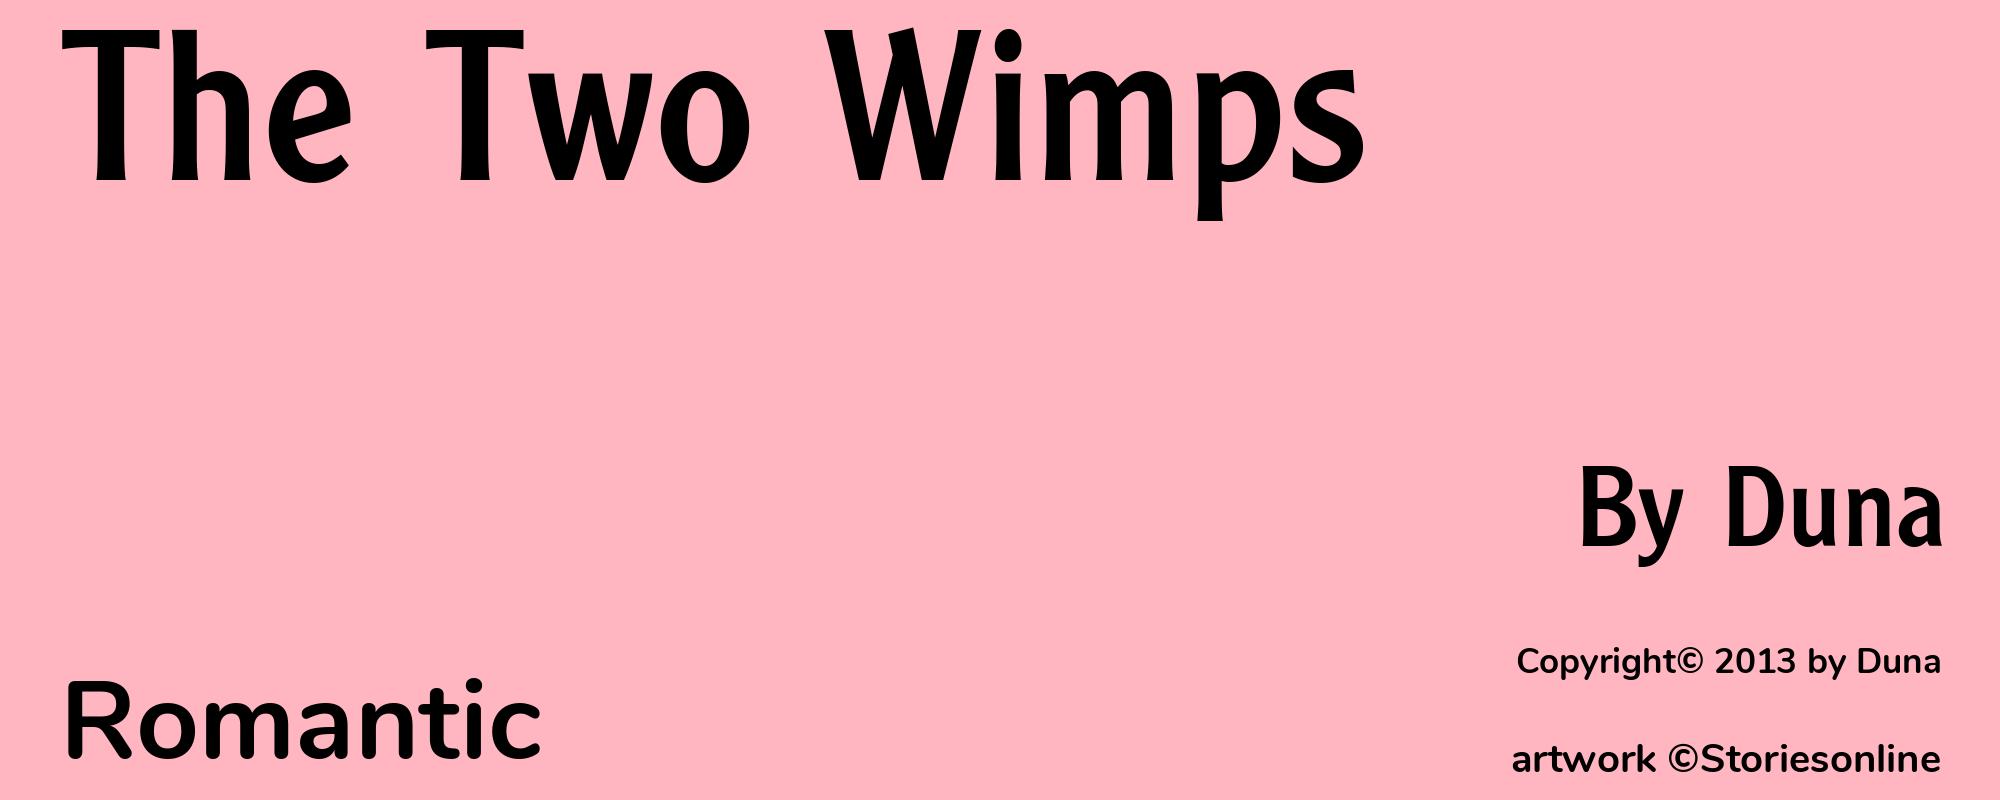 The Two Wimps - Cover